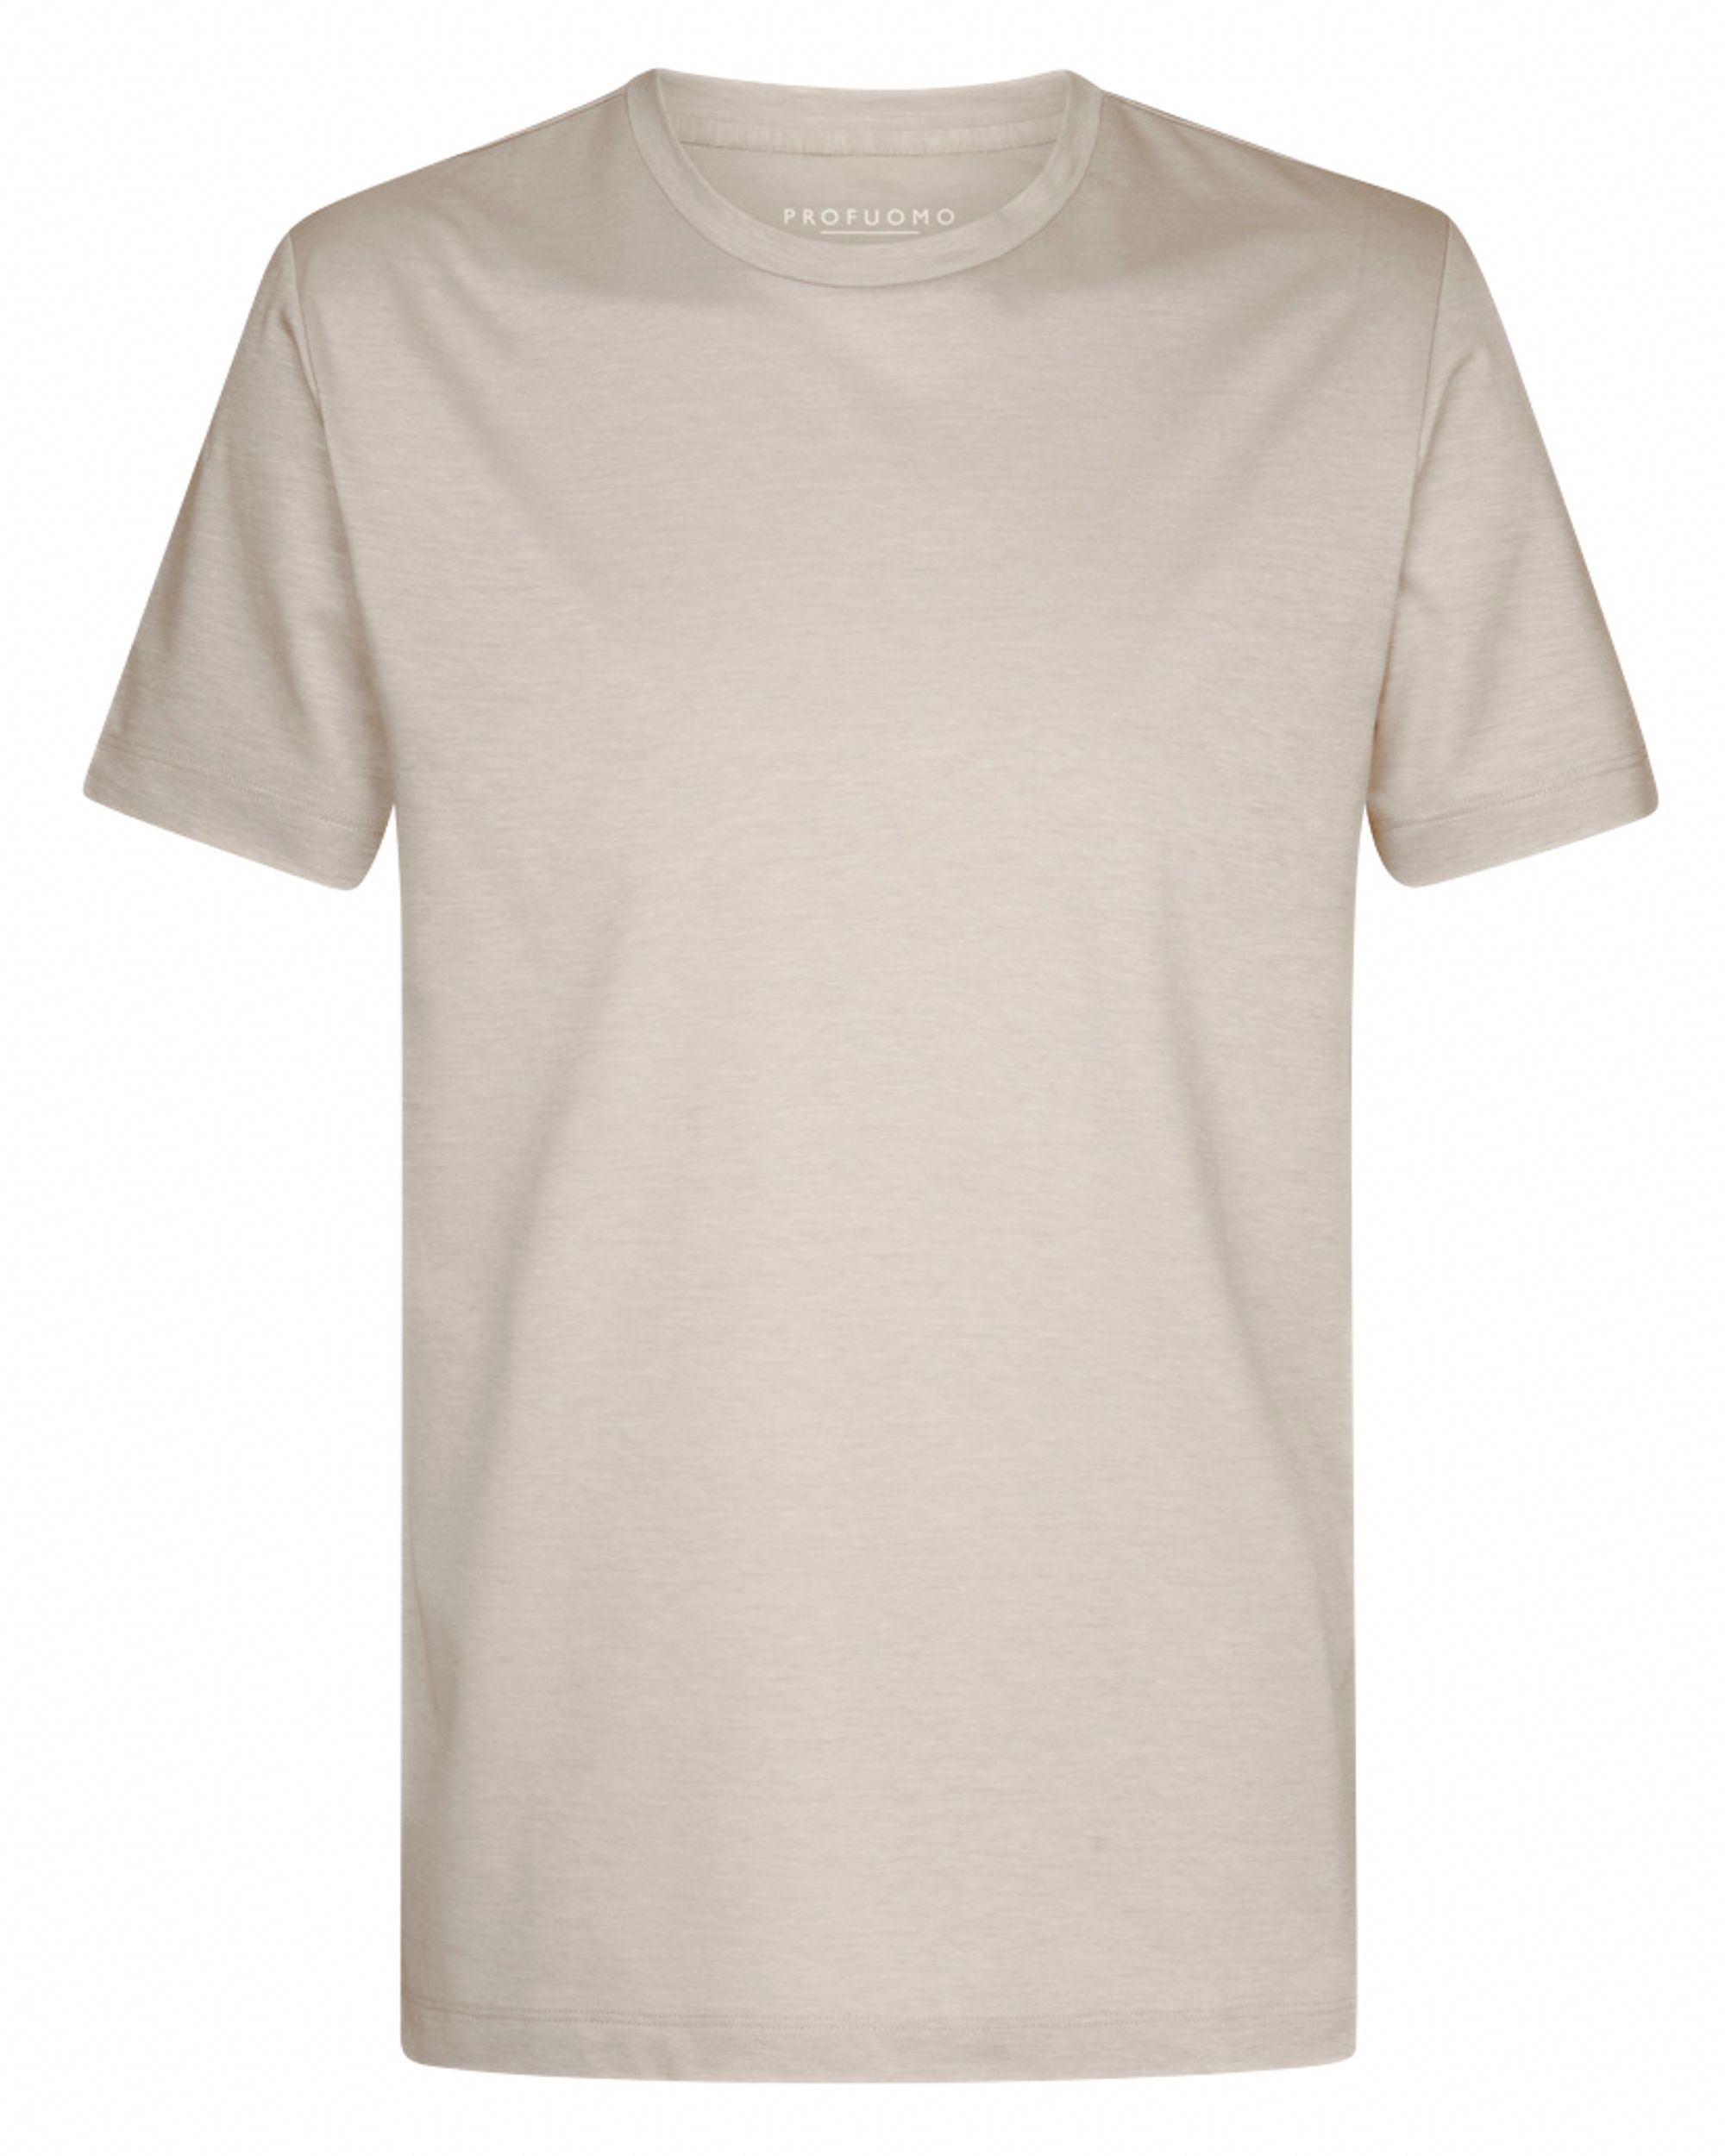 Profuomo T-shirt KM Donker rood 093979-001-L